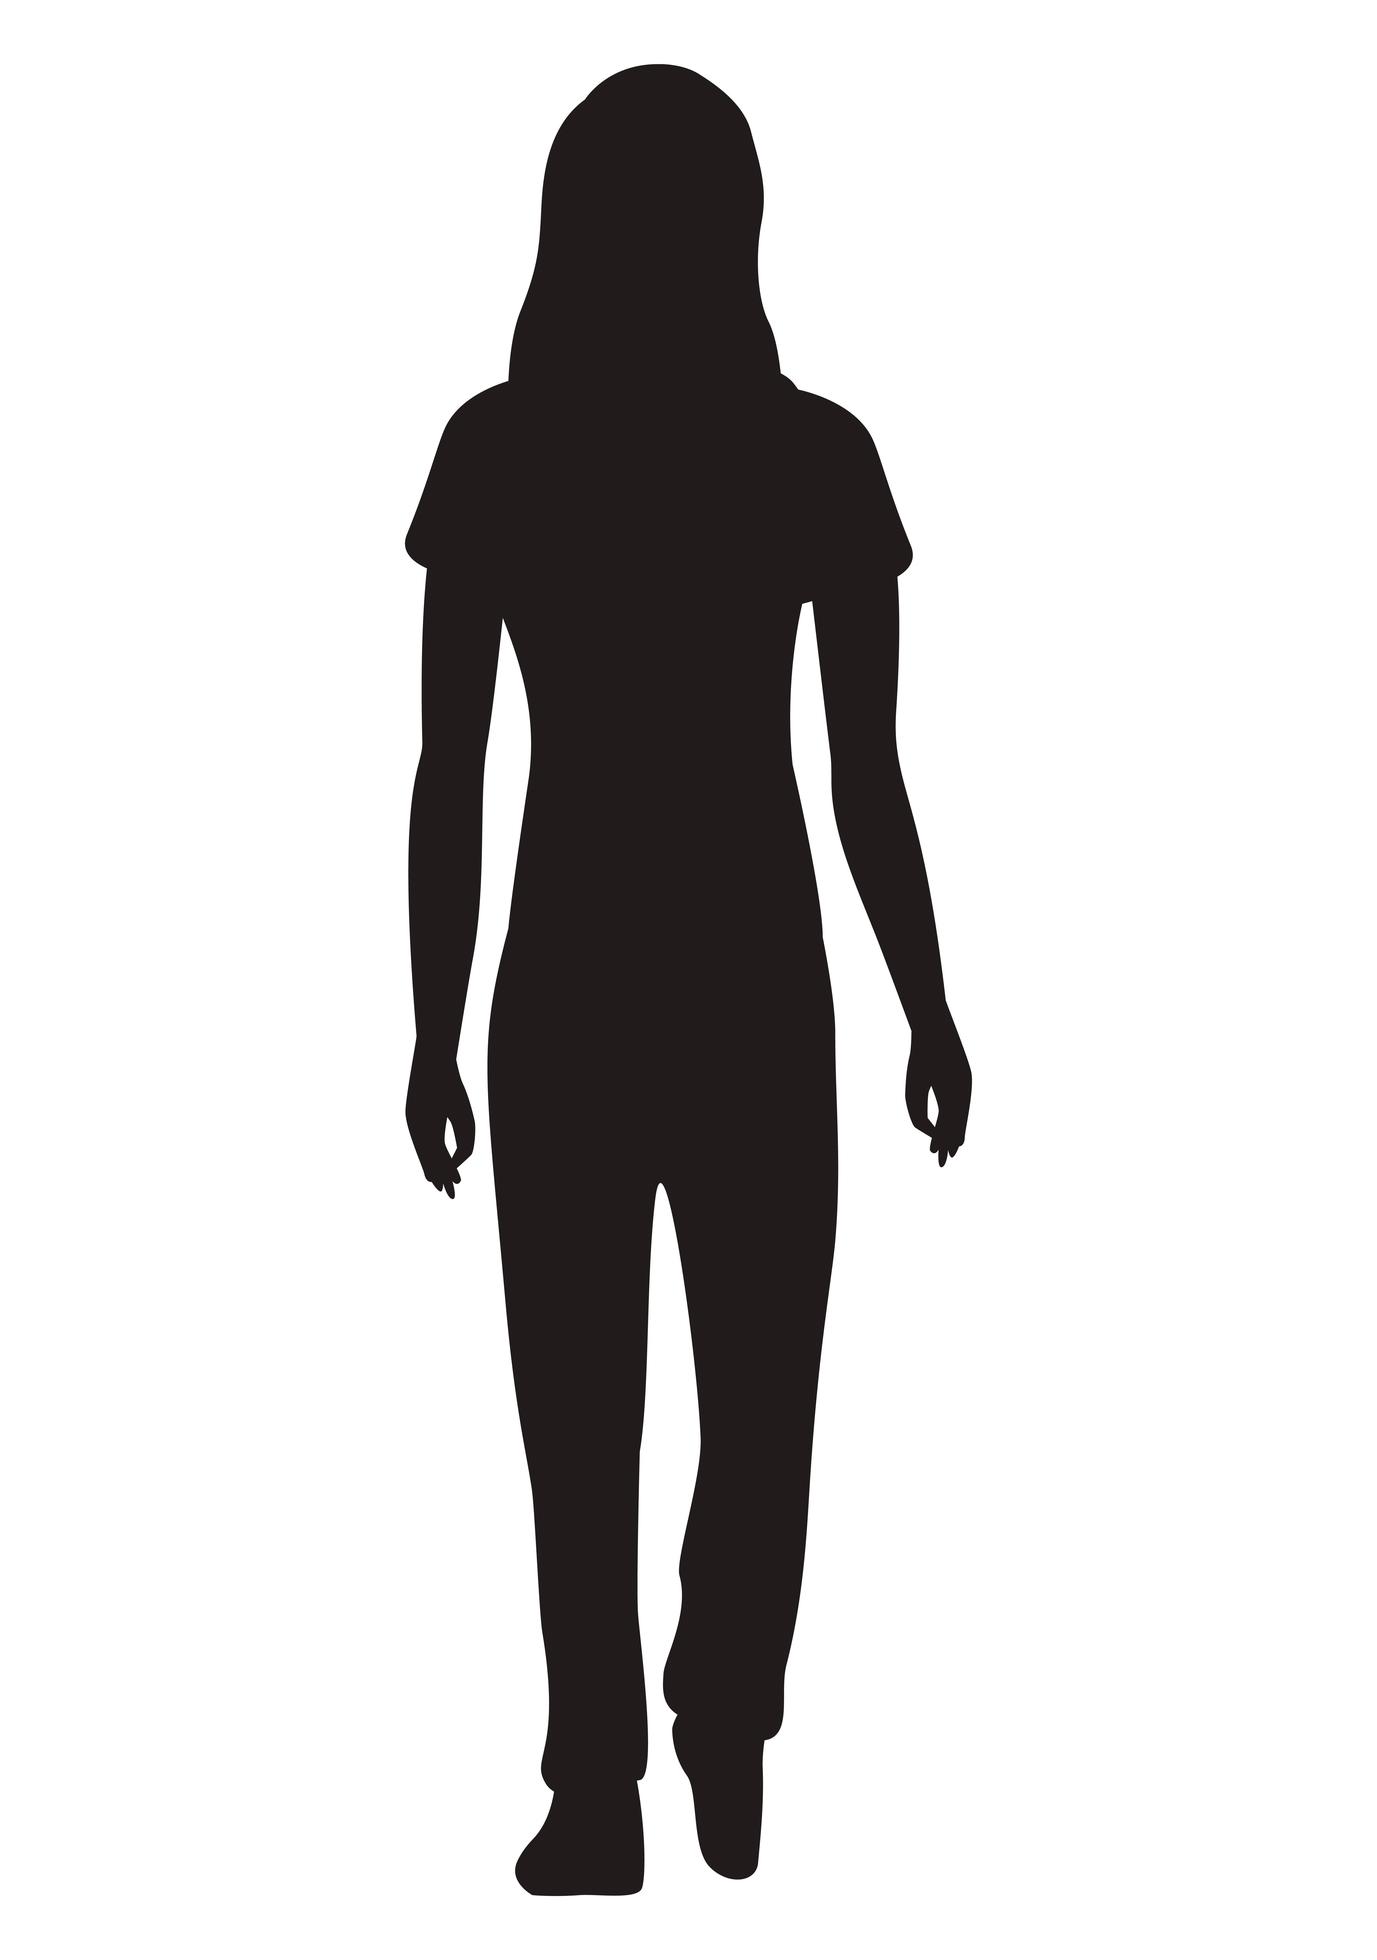 Woman Standing Alone Silhouette